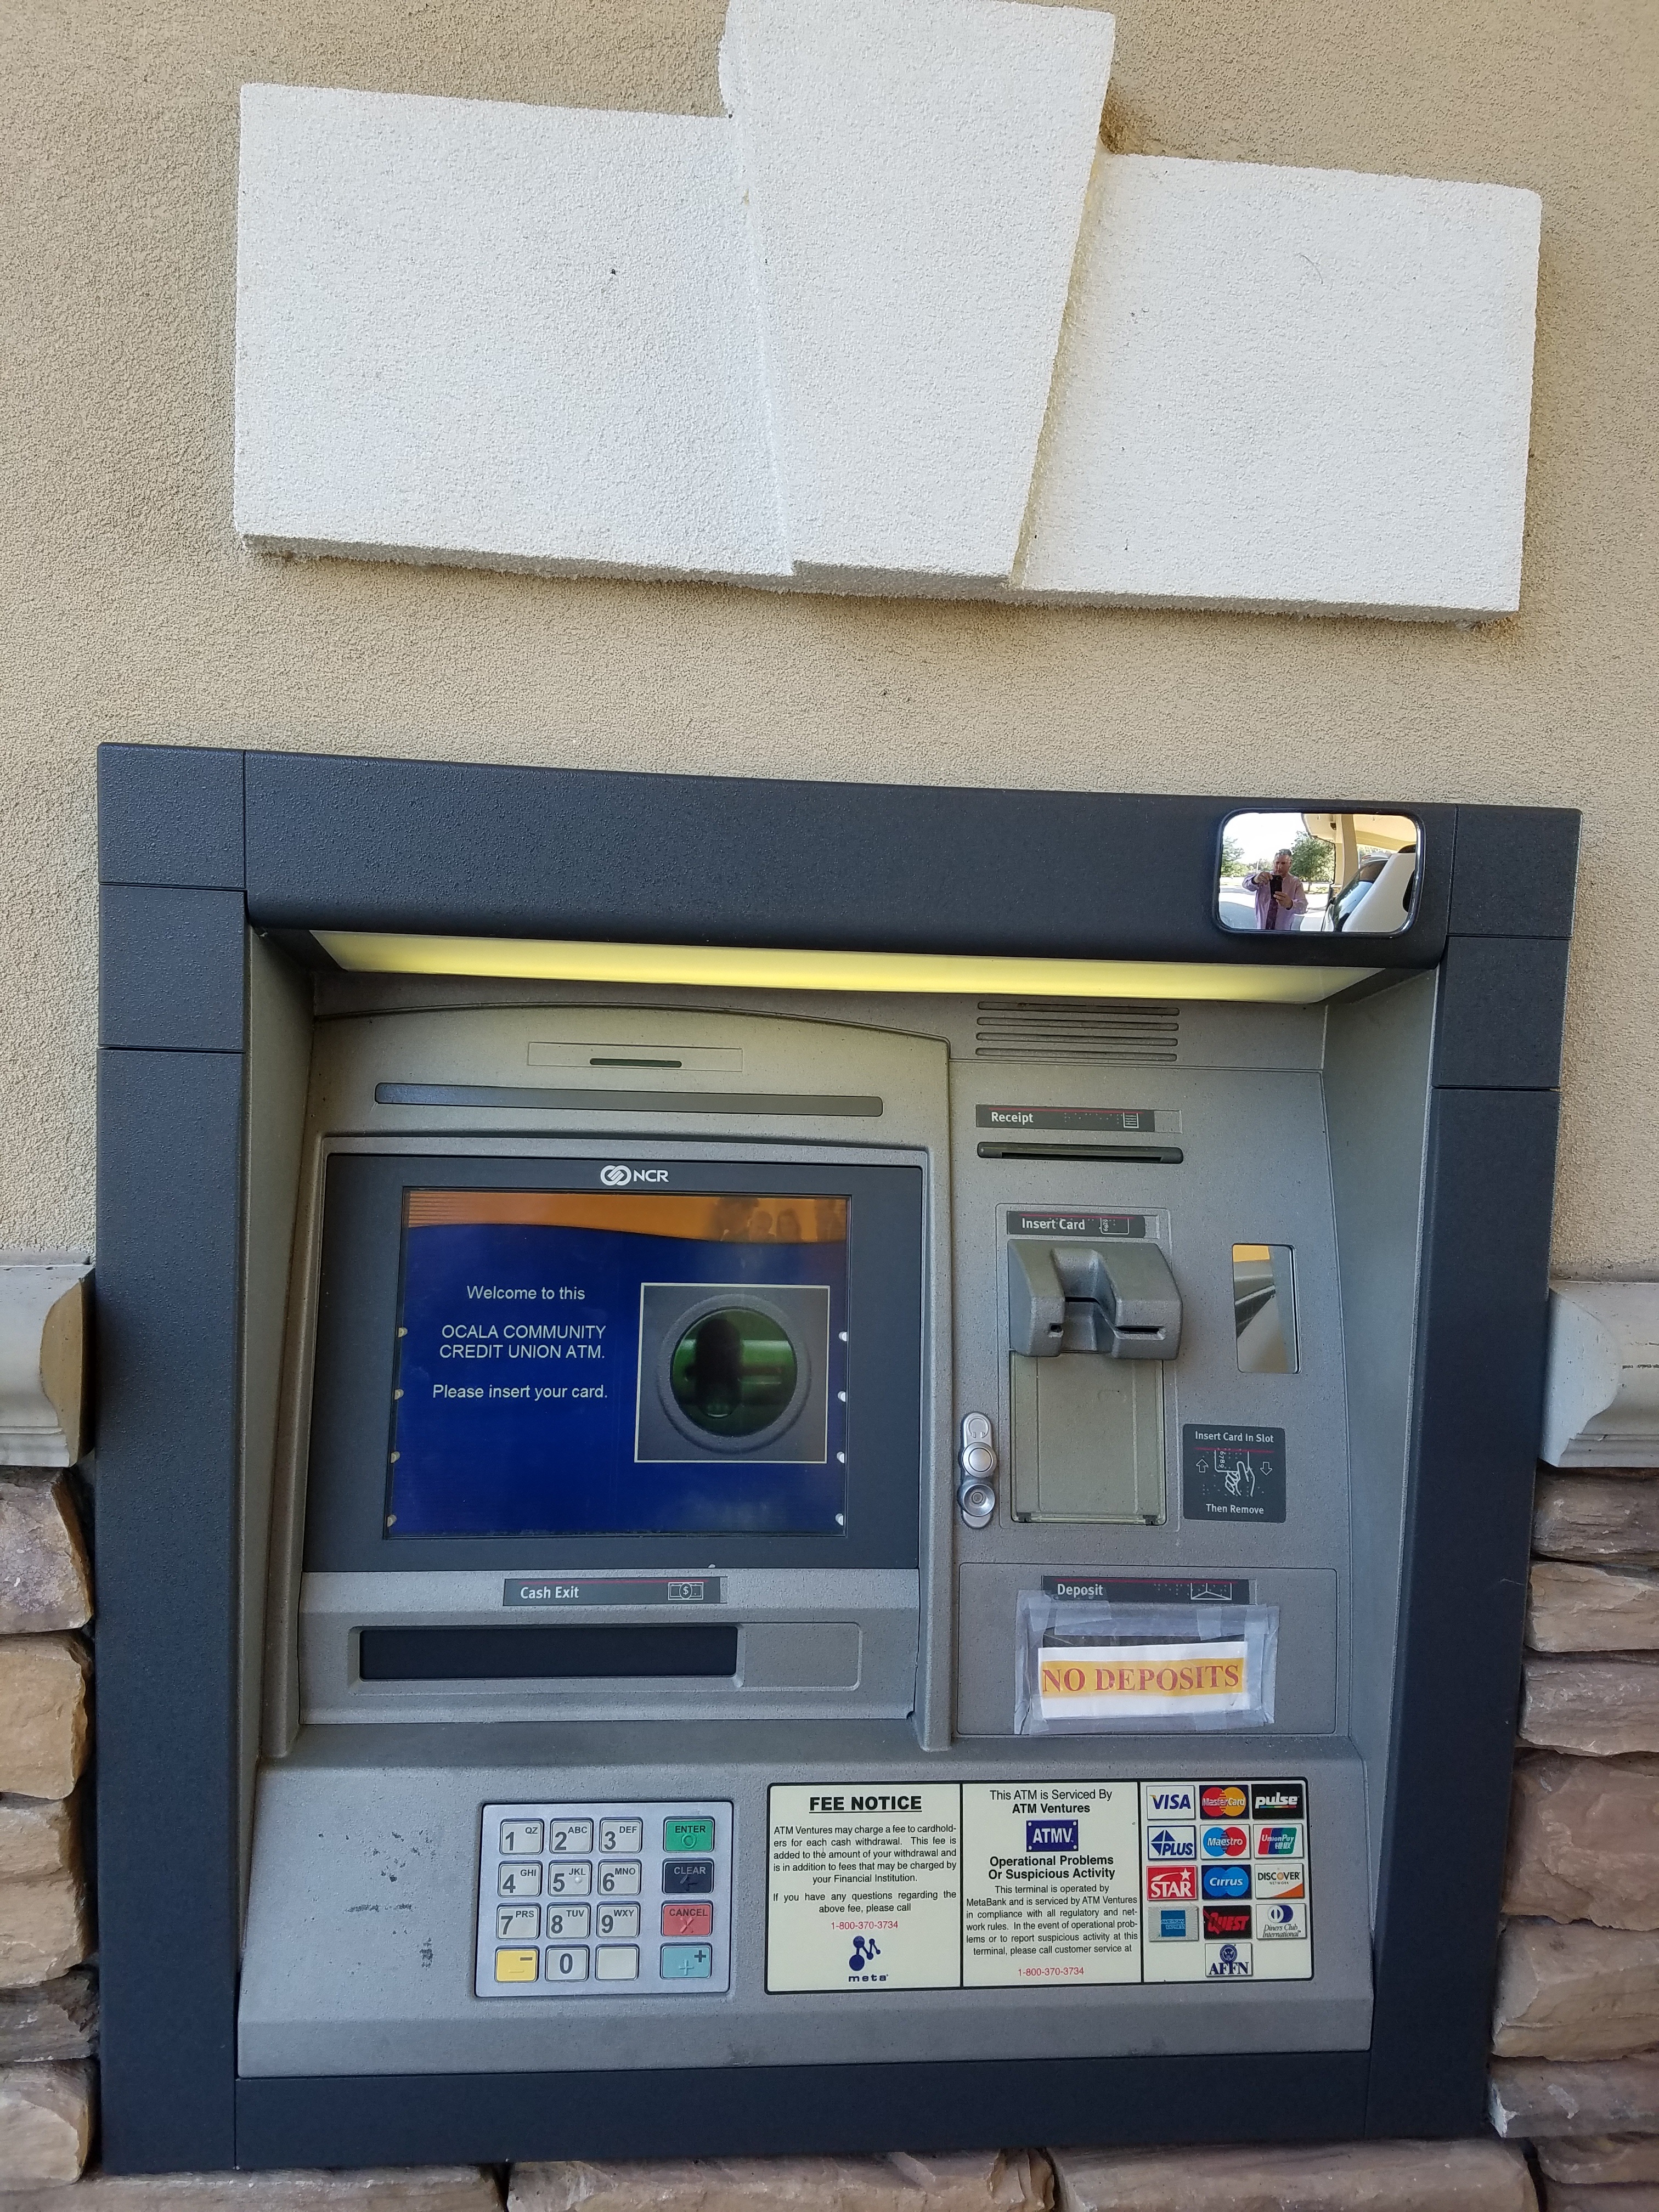 11-17-2016-atm-upgraded-to-emv